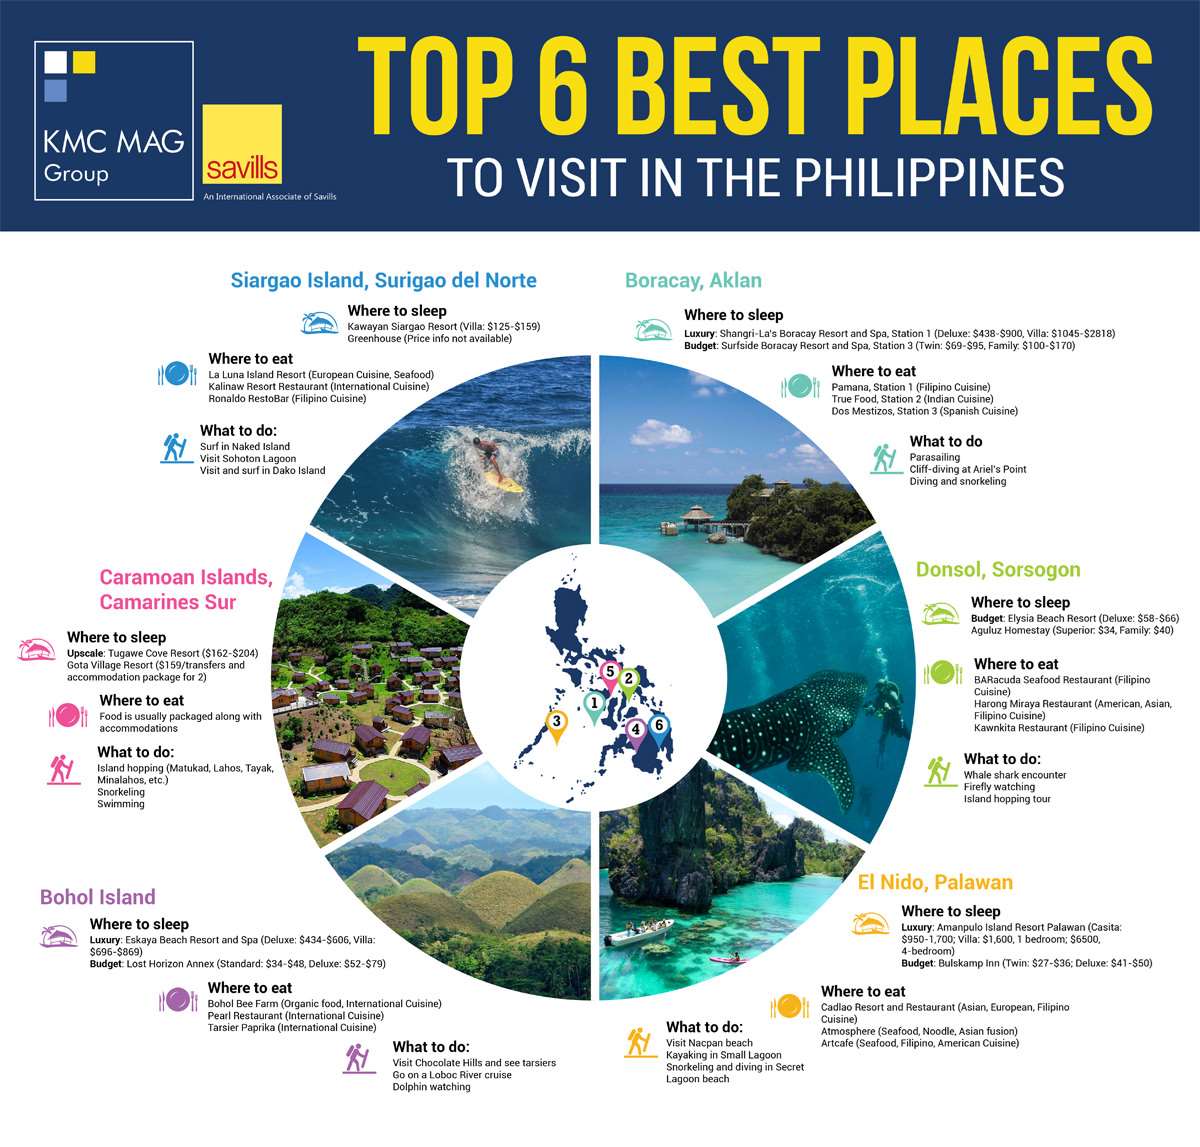 tourism sector of the philippines